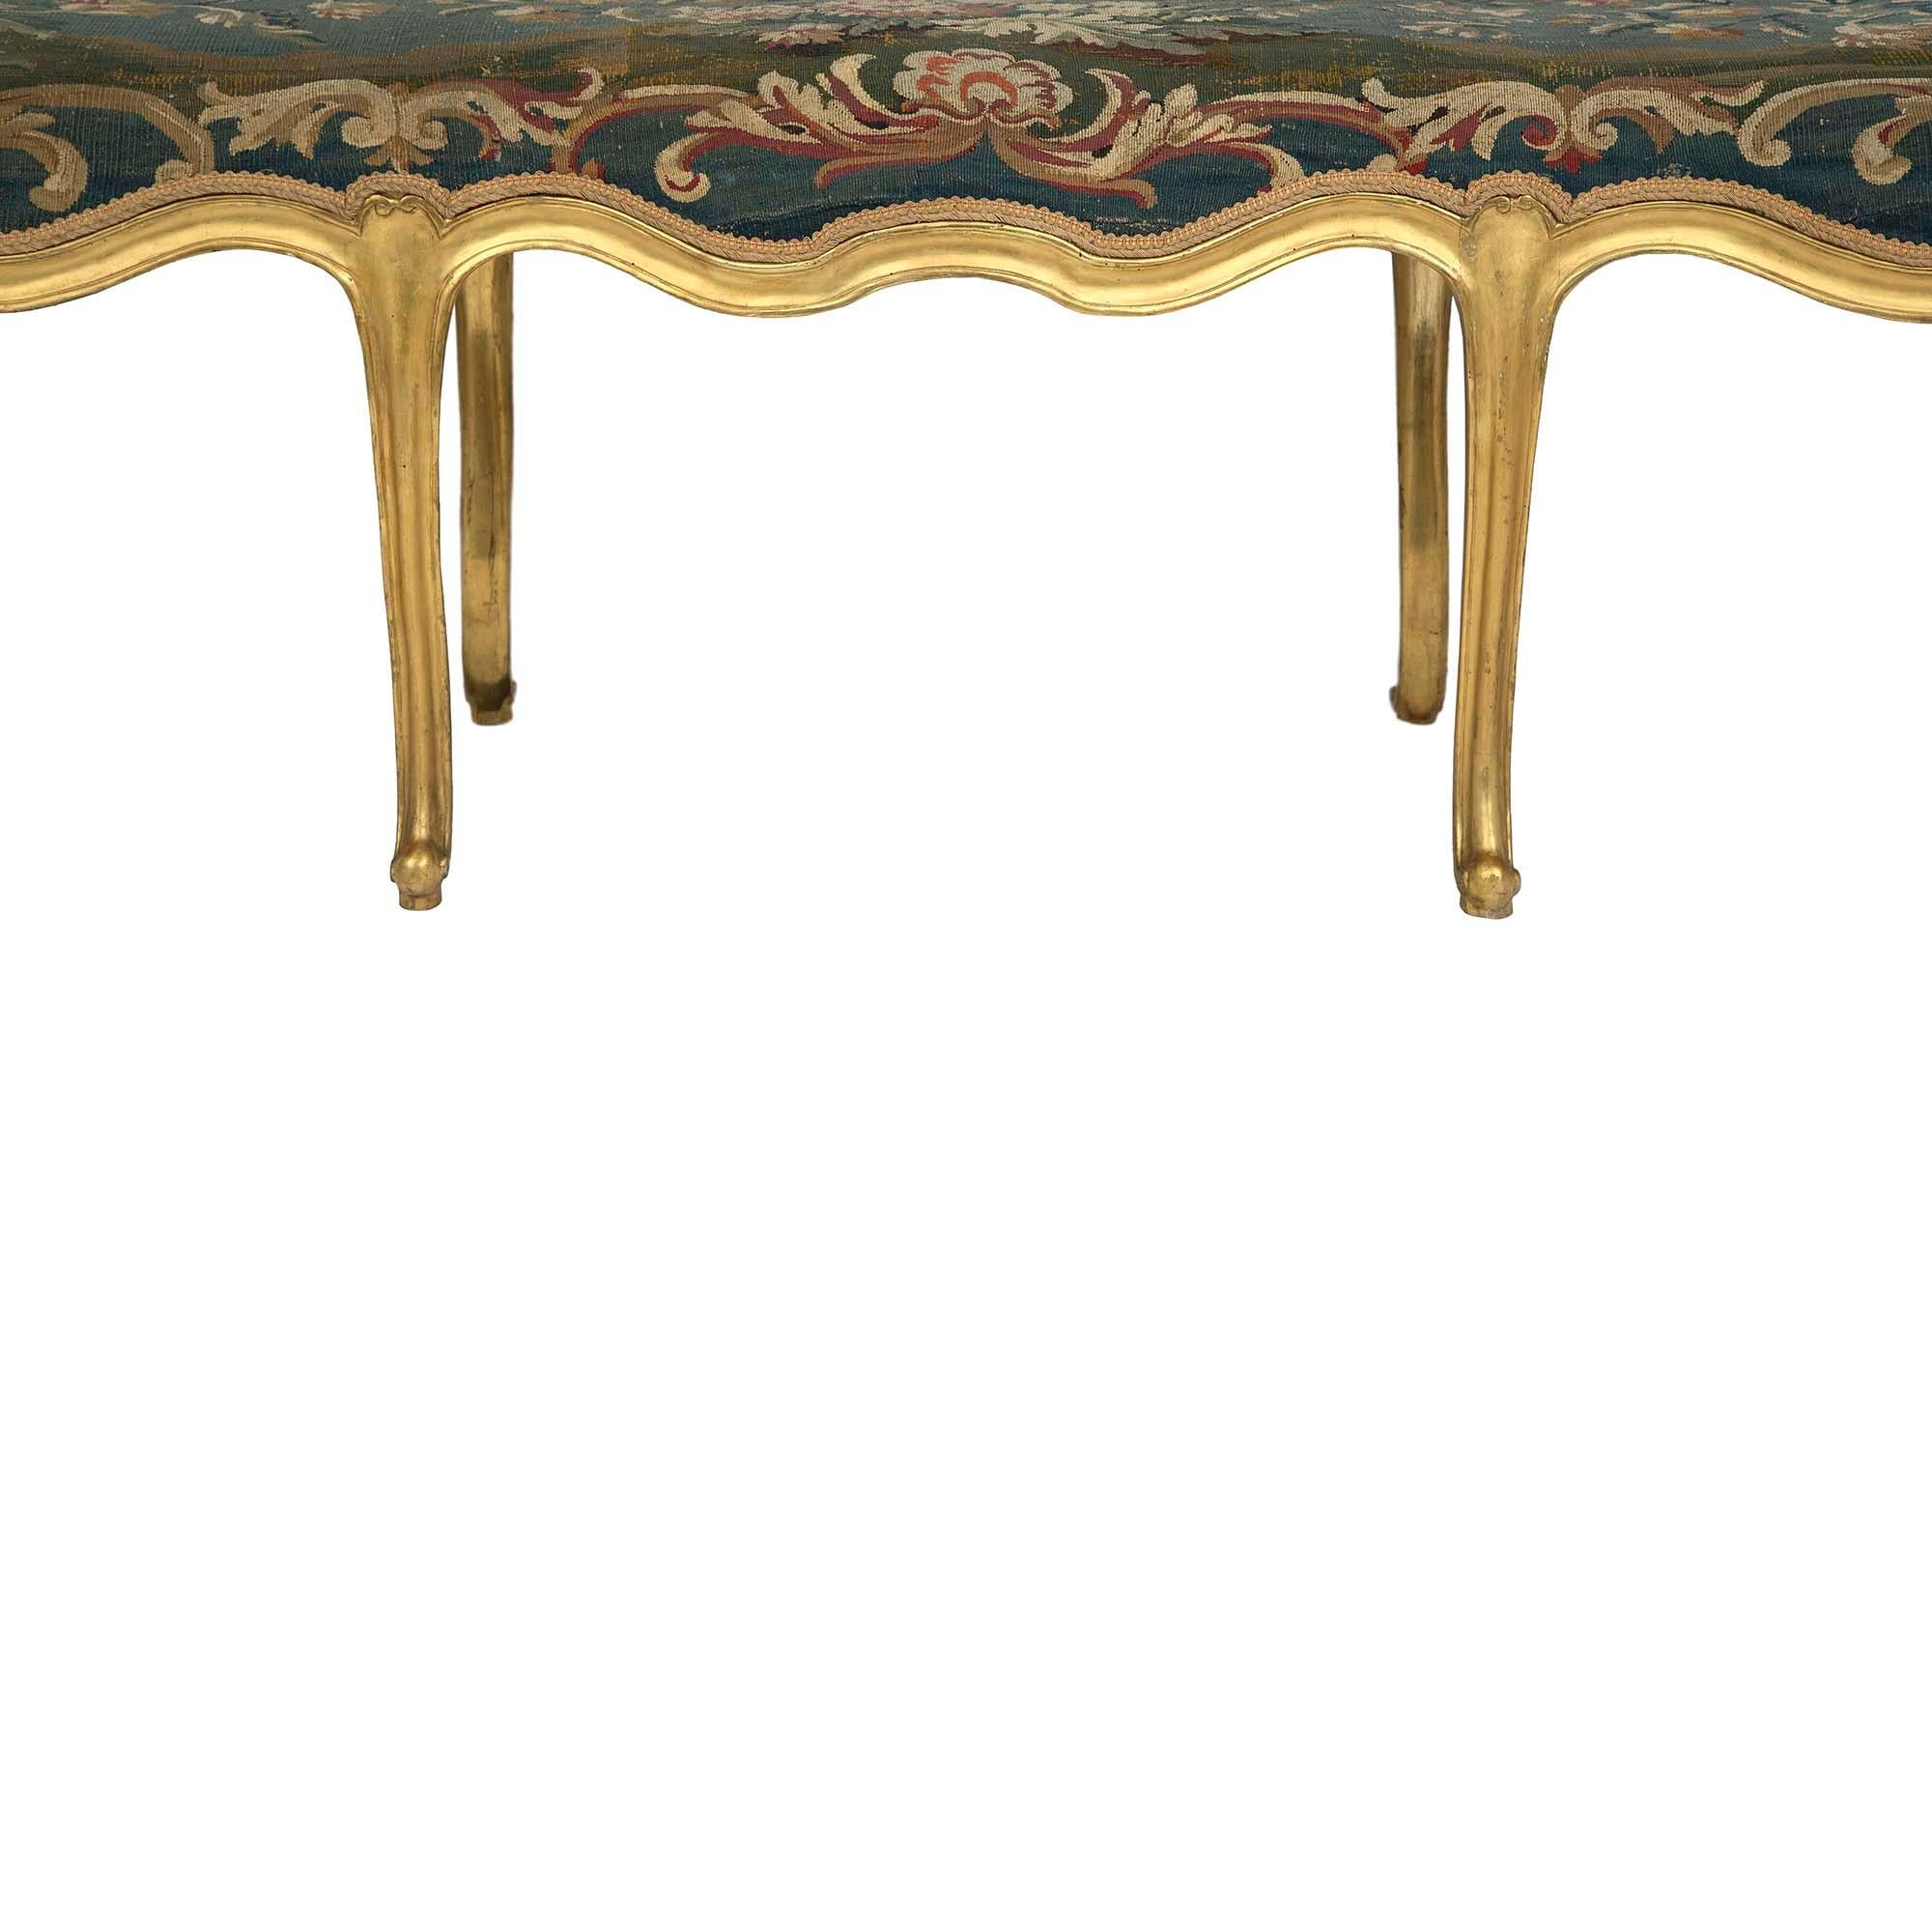 French 18th Century Louis XV Period Giltwood and Aubusson Tapestry Bench In Good Condition For Sale In West Palm Beach, FL